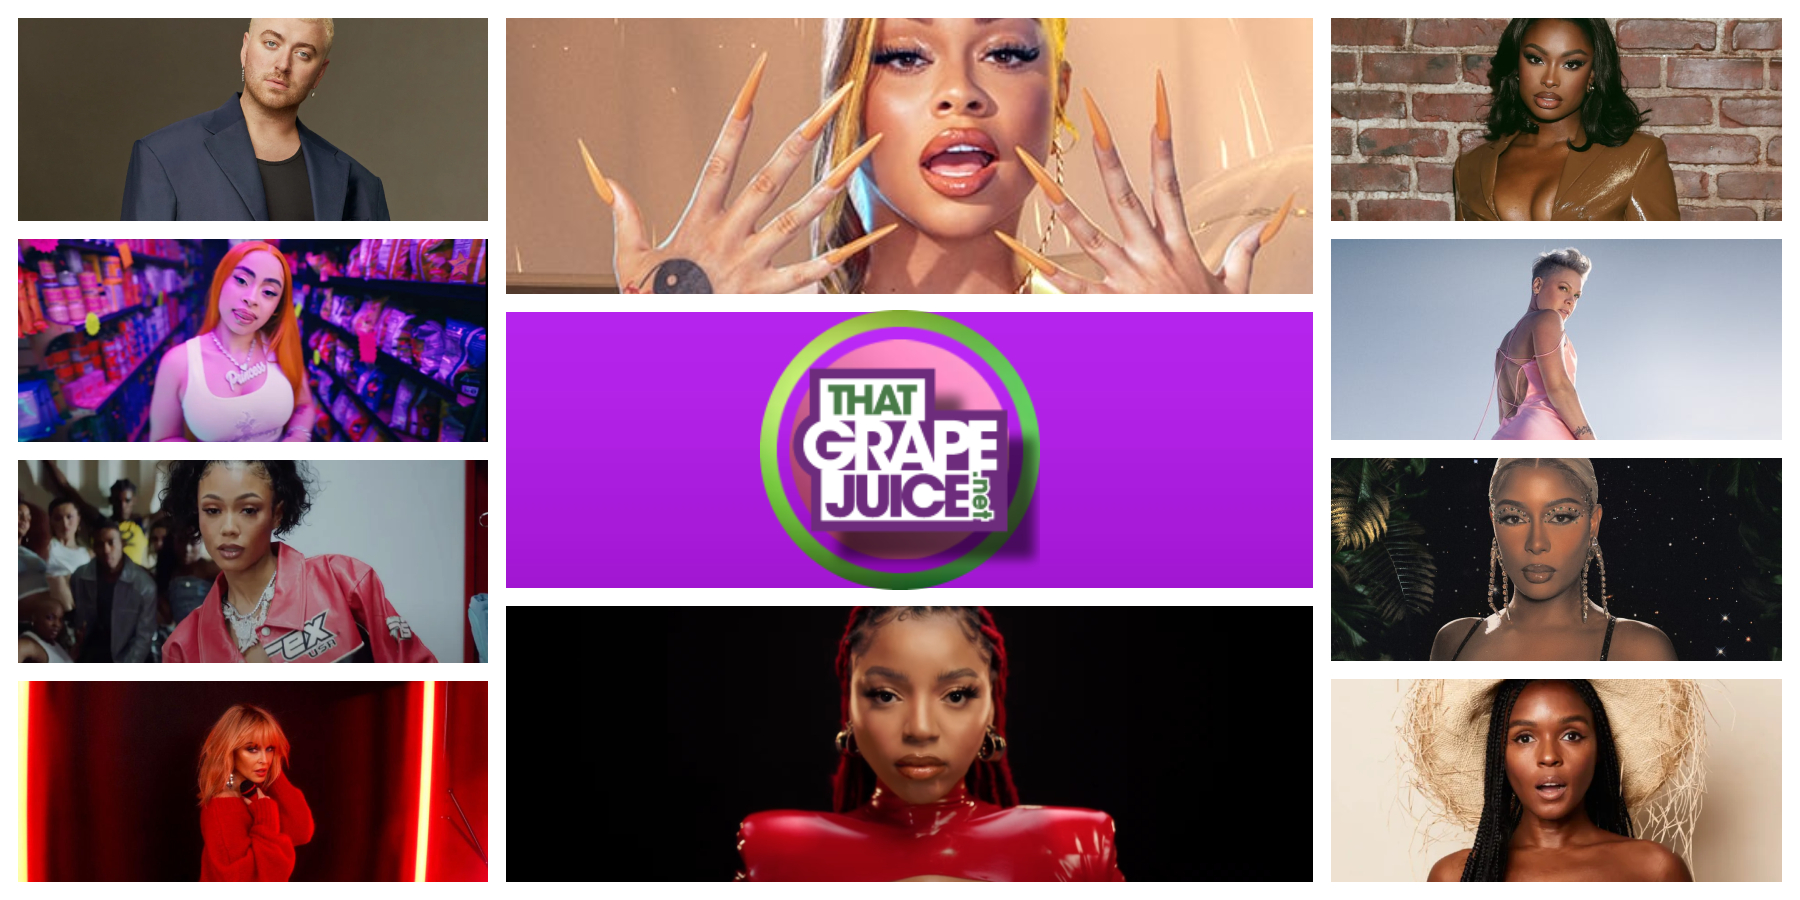 Weigh In 2024 GRAMMY Nomination Snubs & Surprises That Grape Juice